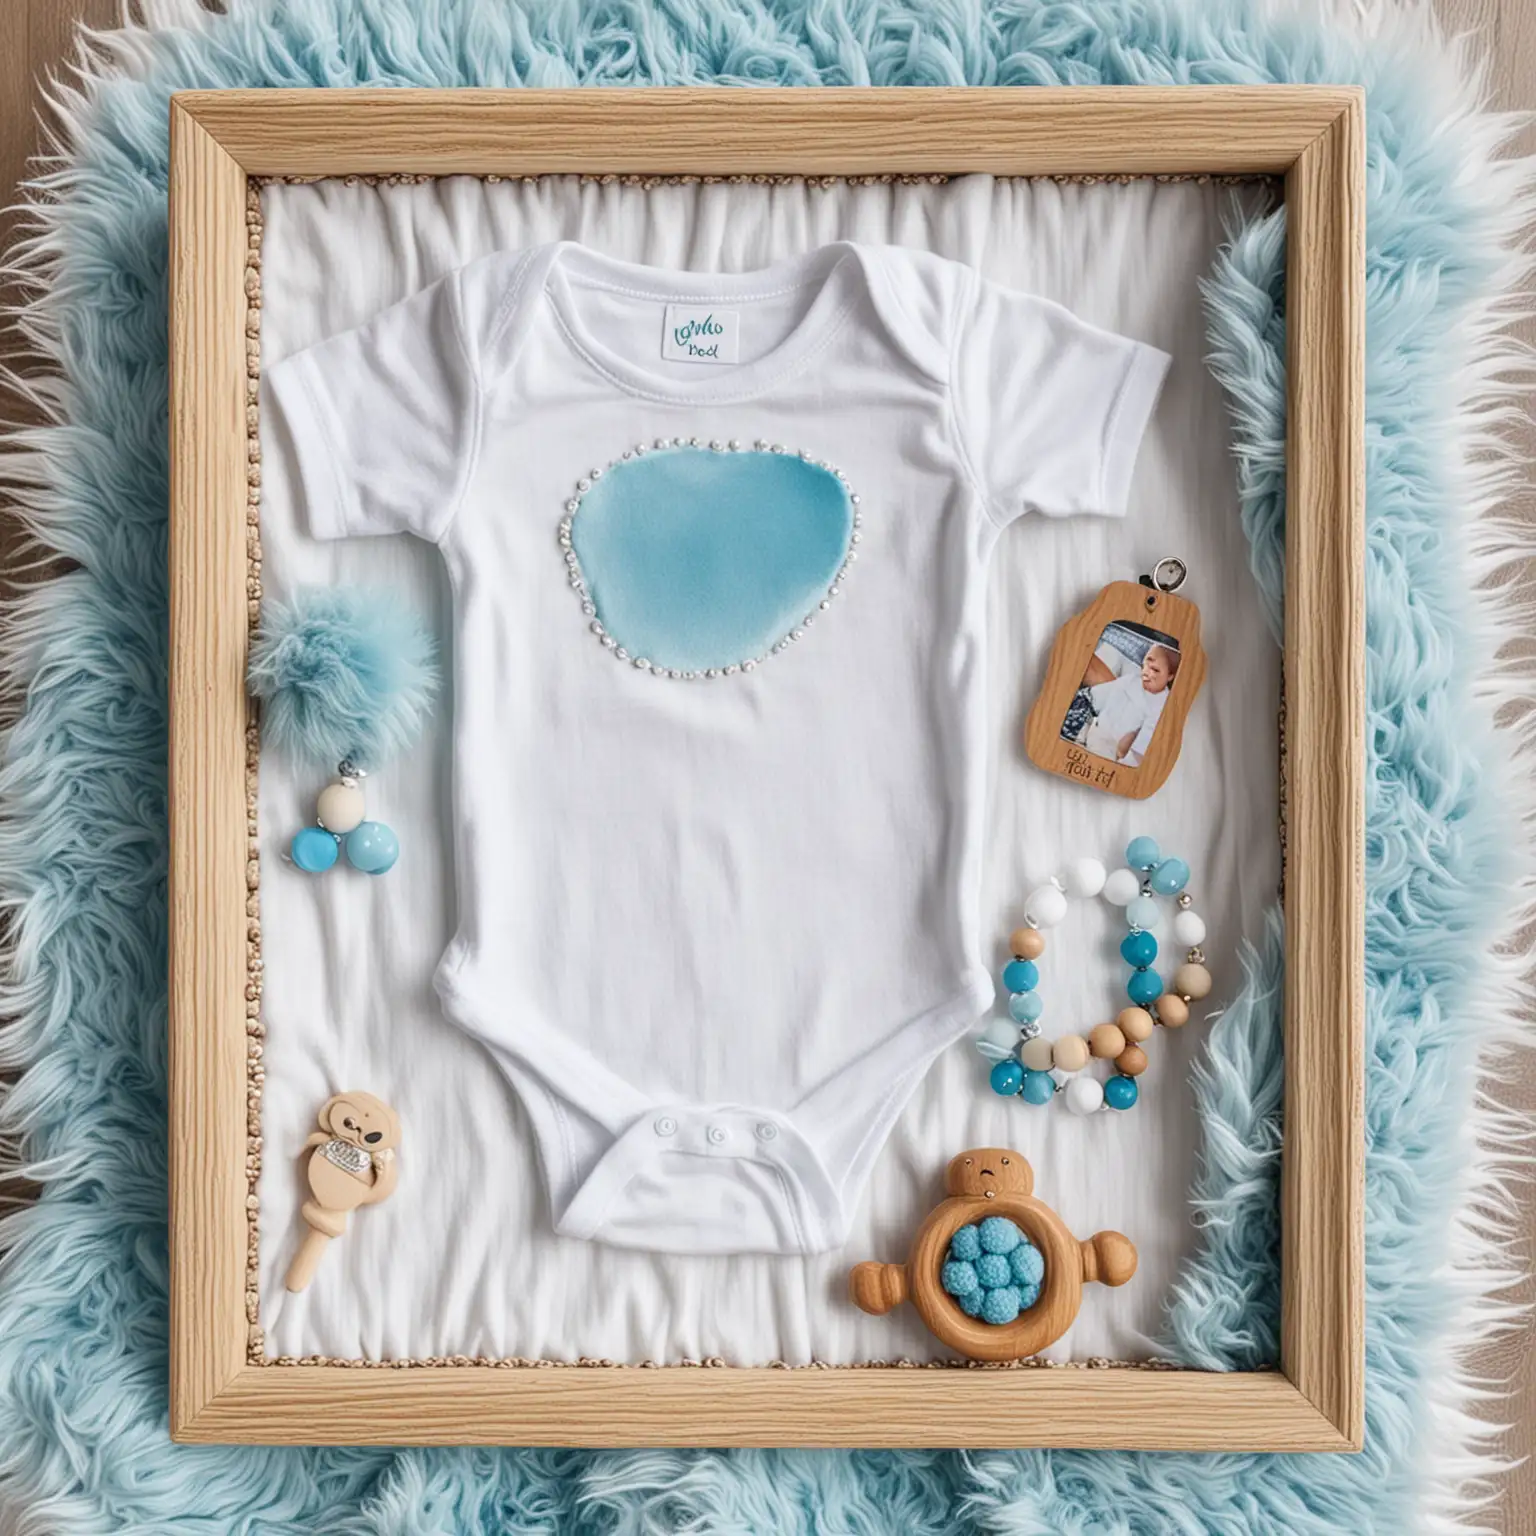 Aerial view, white baby Onesie shirt, Blue fluffy blanket, Picture frame, Wooden Rattle, Beaded pacifier holder